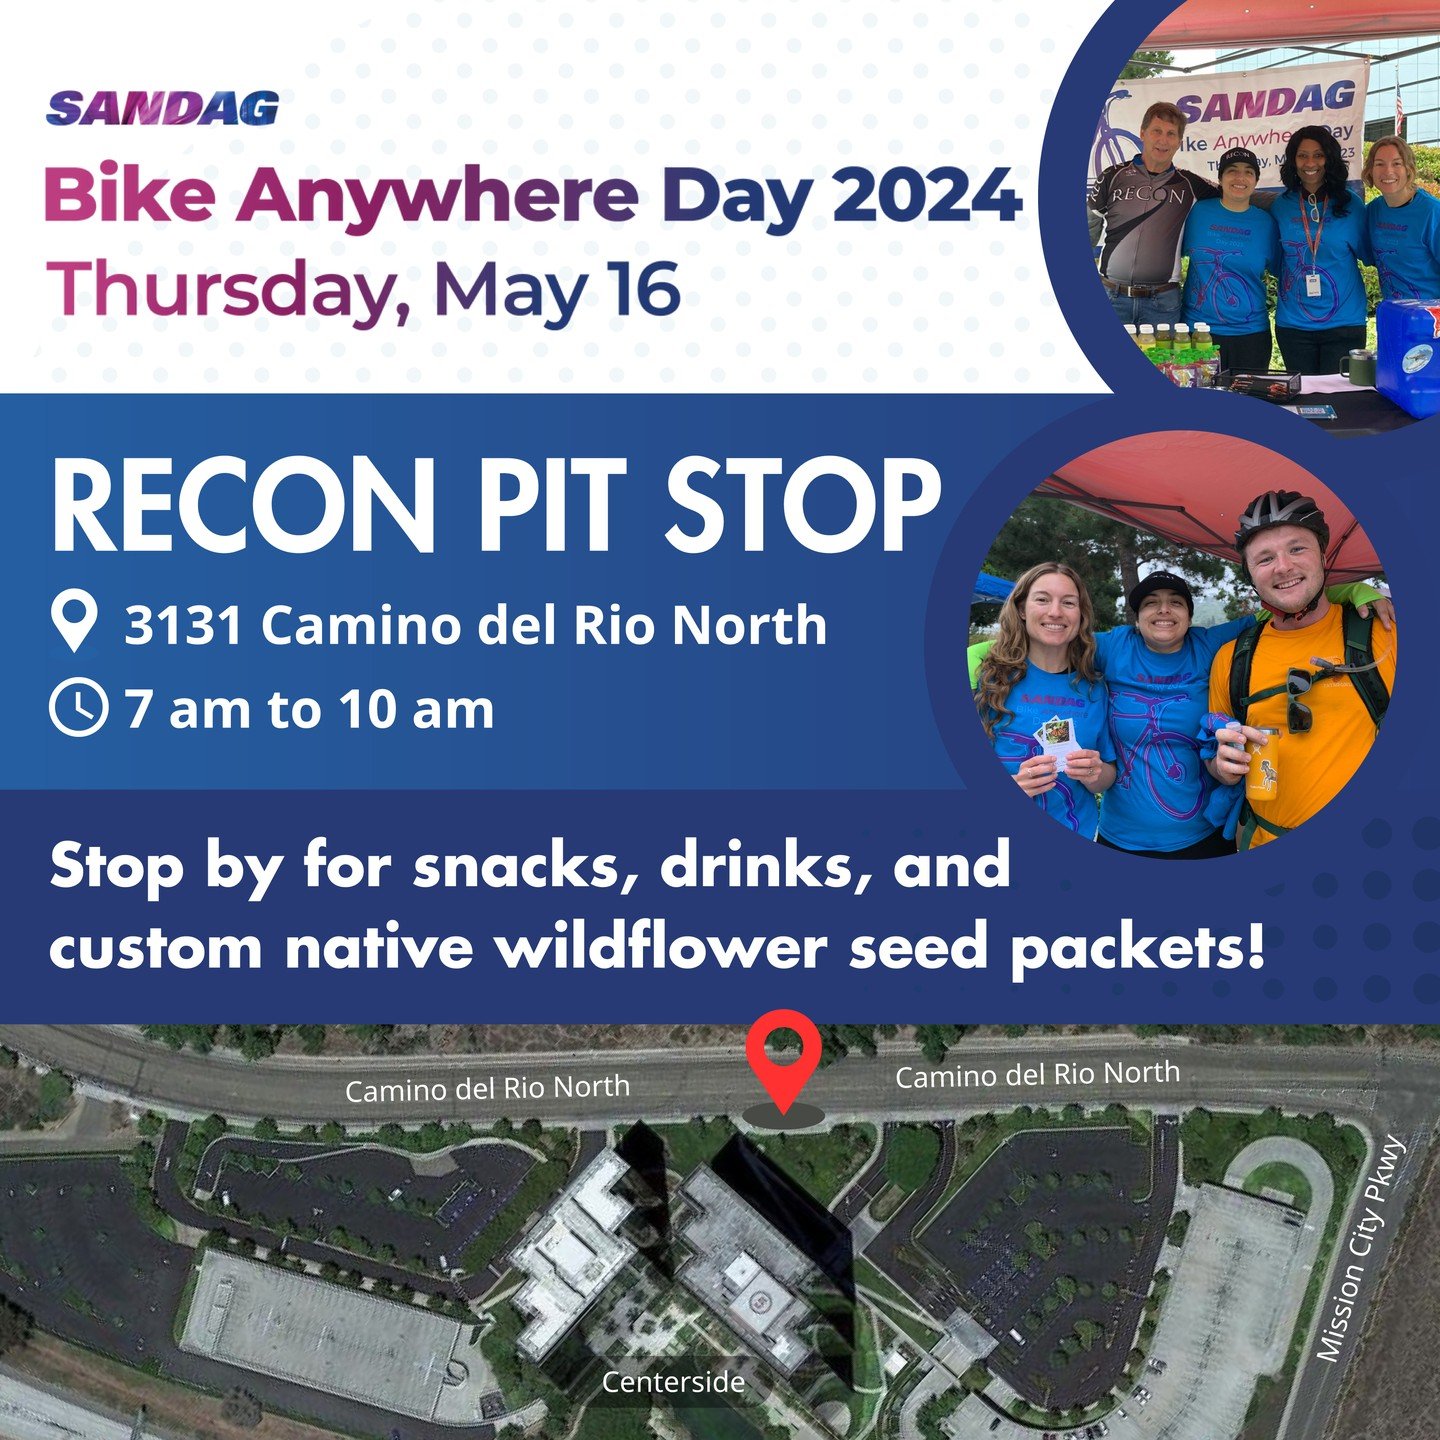 We look forward to seeing you on Thursday @reconenv&rsquo;s Pit Stop for SANDAG&rsquo;s Bike Anywhere Day 2024. From 7-10 a.m. stop by for free snacks, drinks, get an event t-shirt, and pick up our custom native wildflower seed packets. 

Visit SANDA